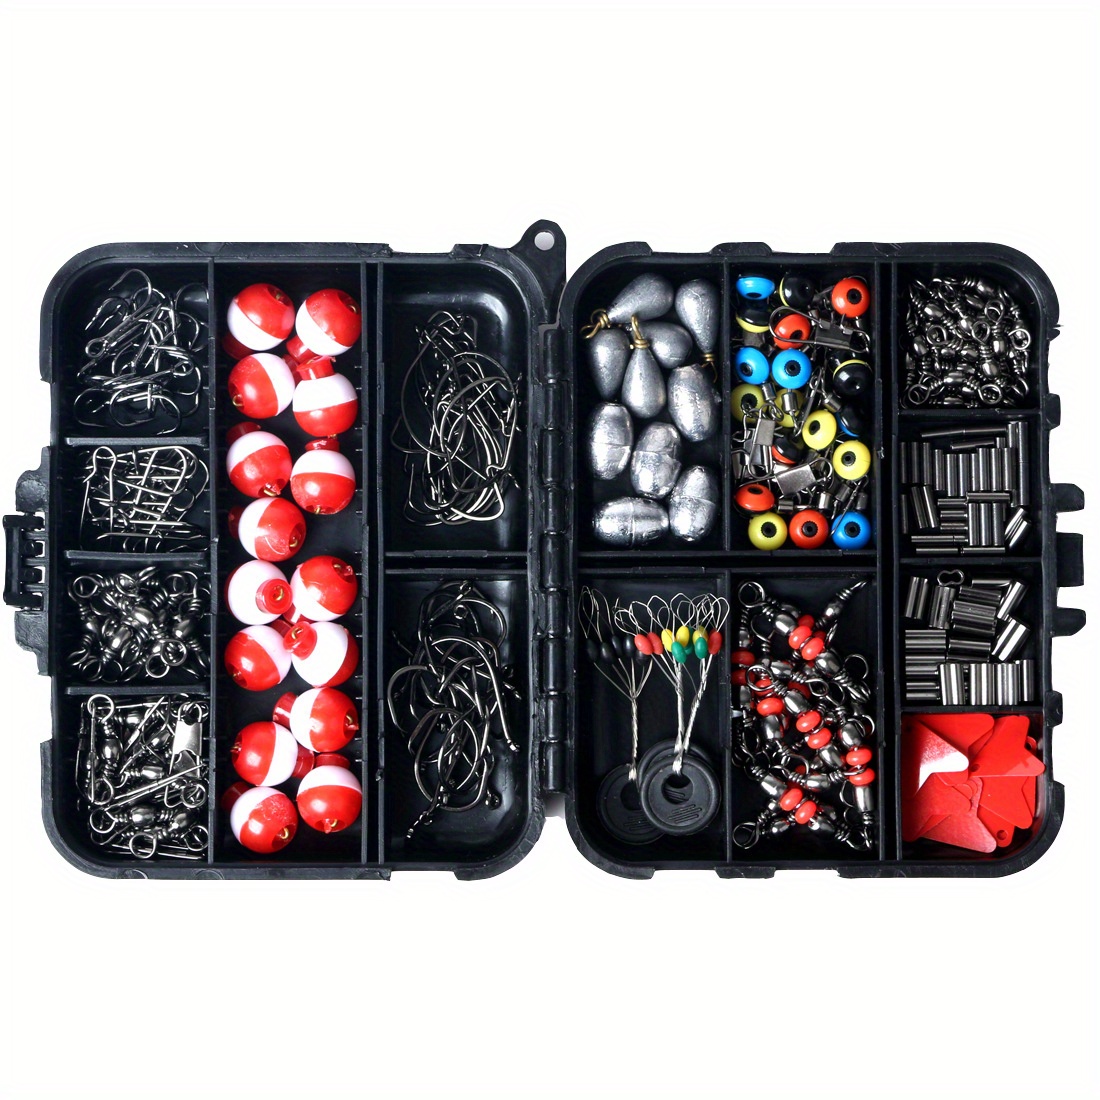 Wisfunlly 257pcs Fishing Accessories Kit, Fishing Tackle Box with